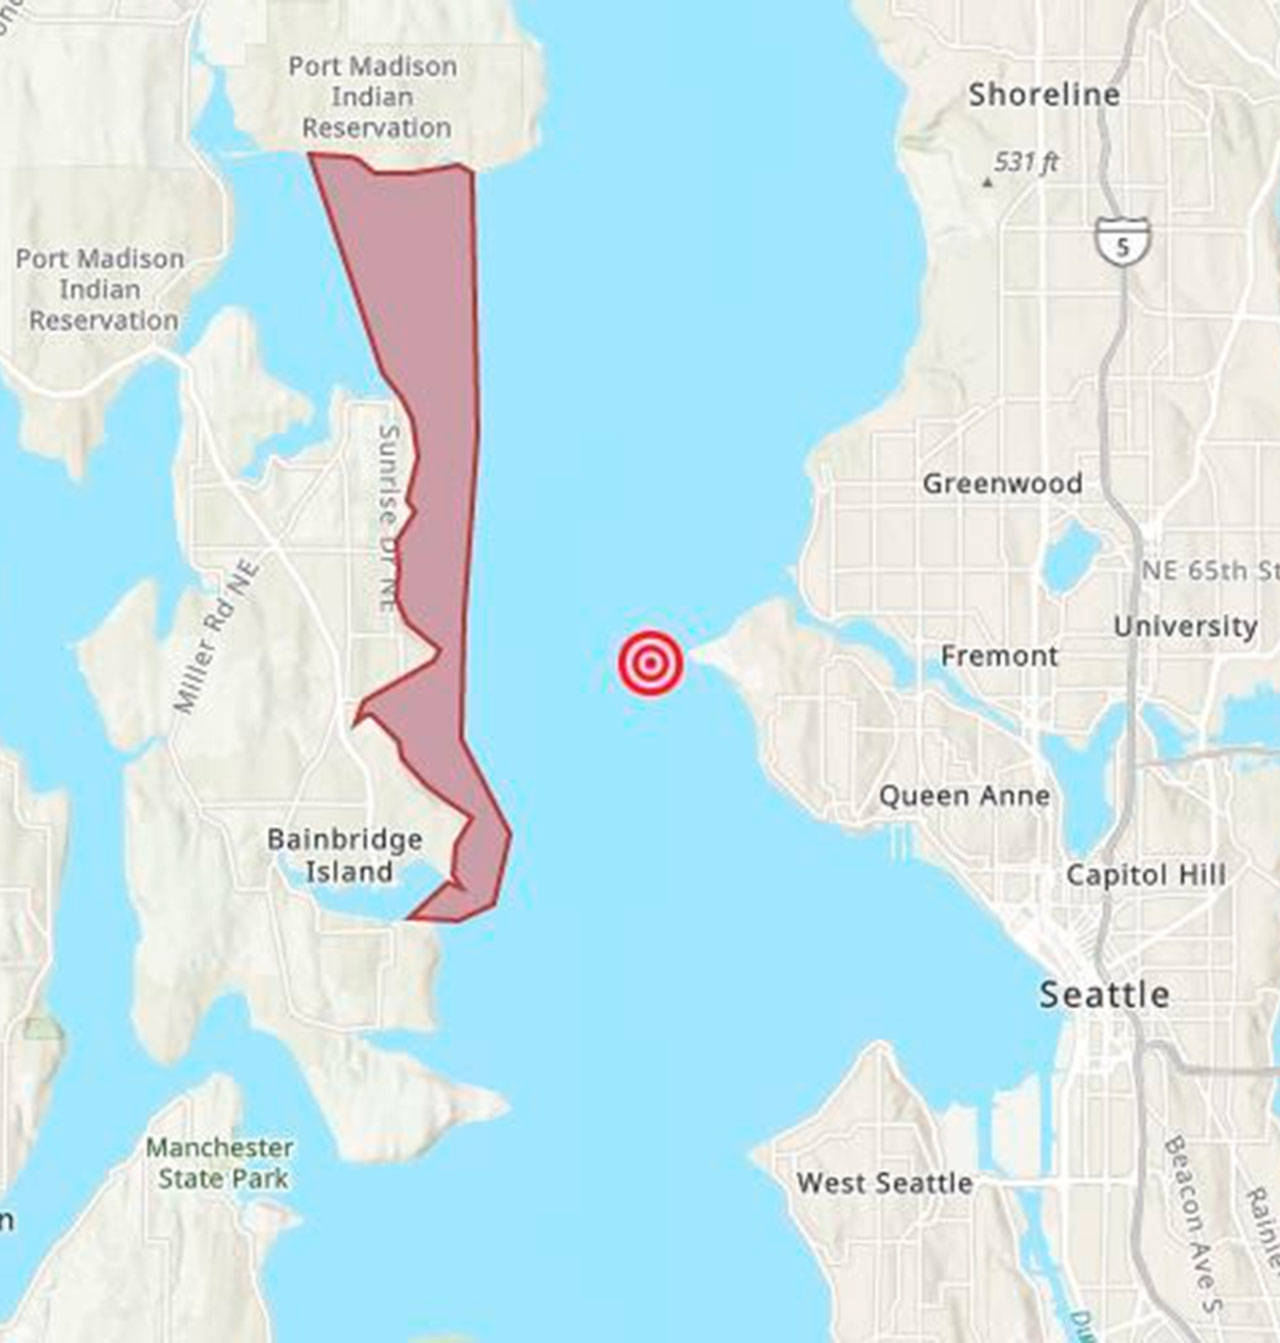 A map of the impacted shoreline/beaches from Thursday’s sewage spill in Seattle. (Image courtesy of the Kitsap Public Health District)